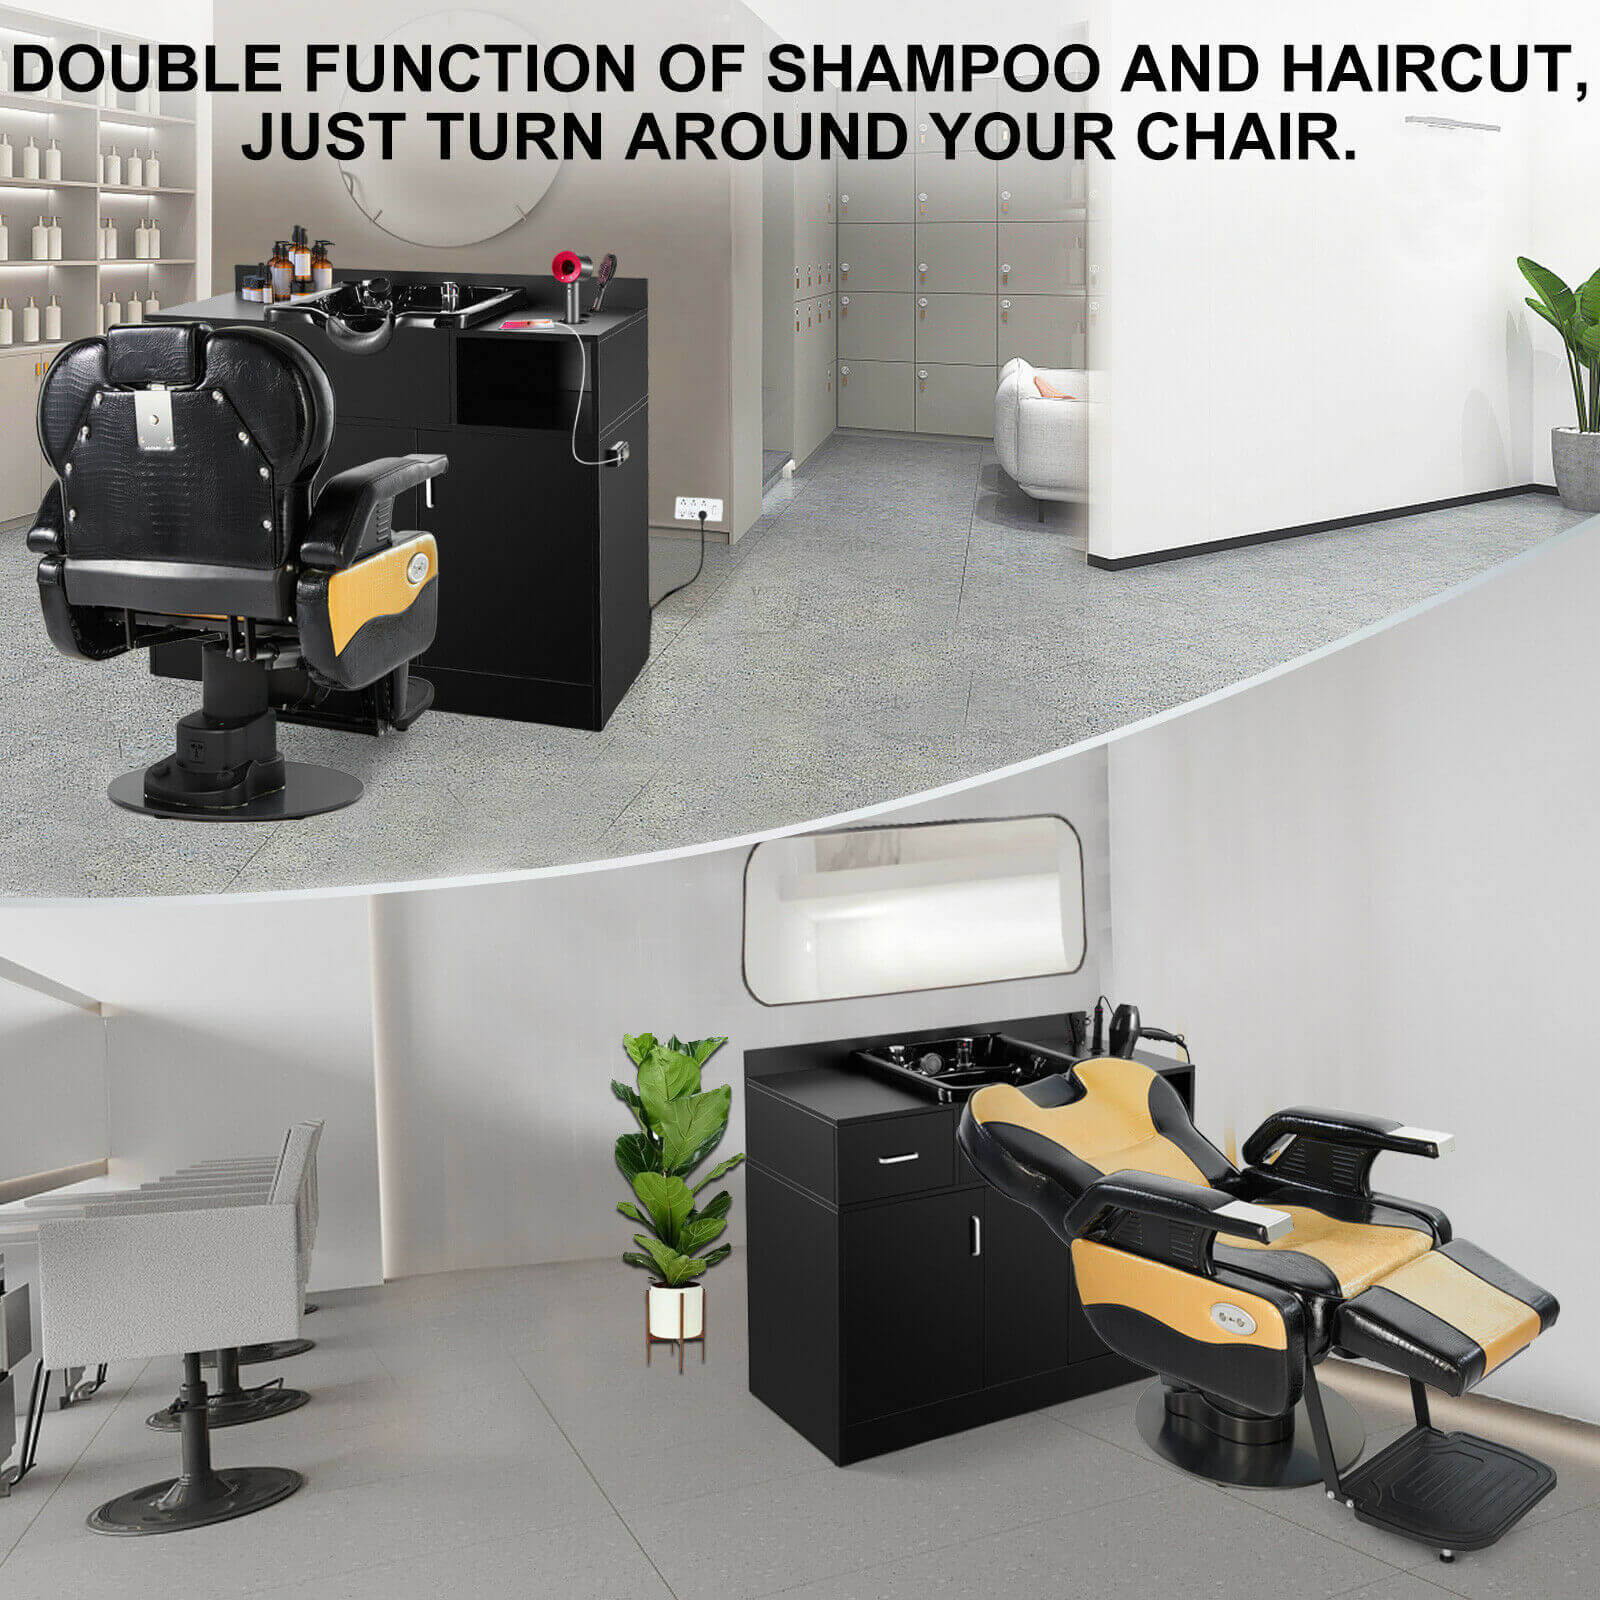 #10093 Shampoo Station with Shampoo Bowl and Drawer, All in One Backwash Sink with USB, 110V Outlets, Hair Dryer Holes and P Trap